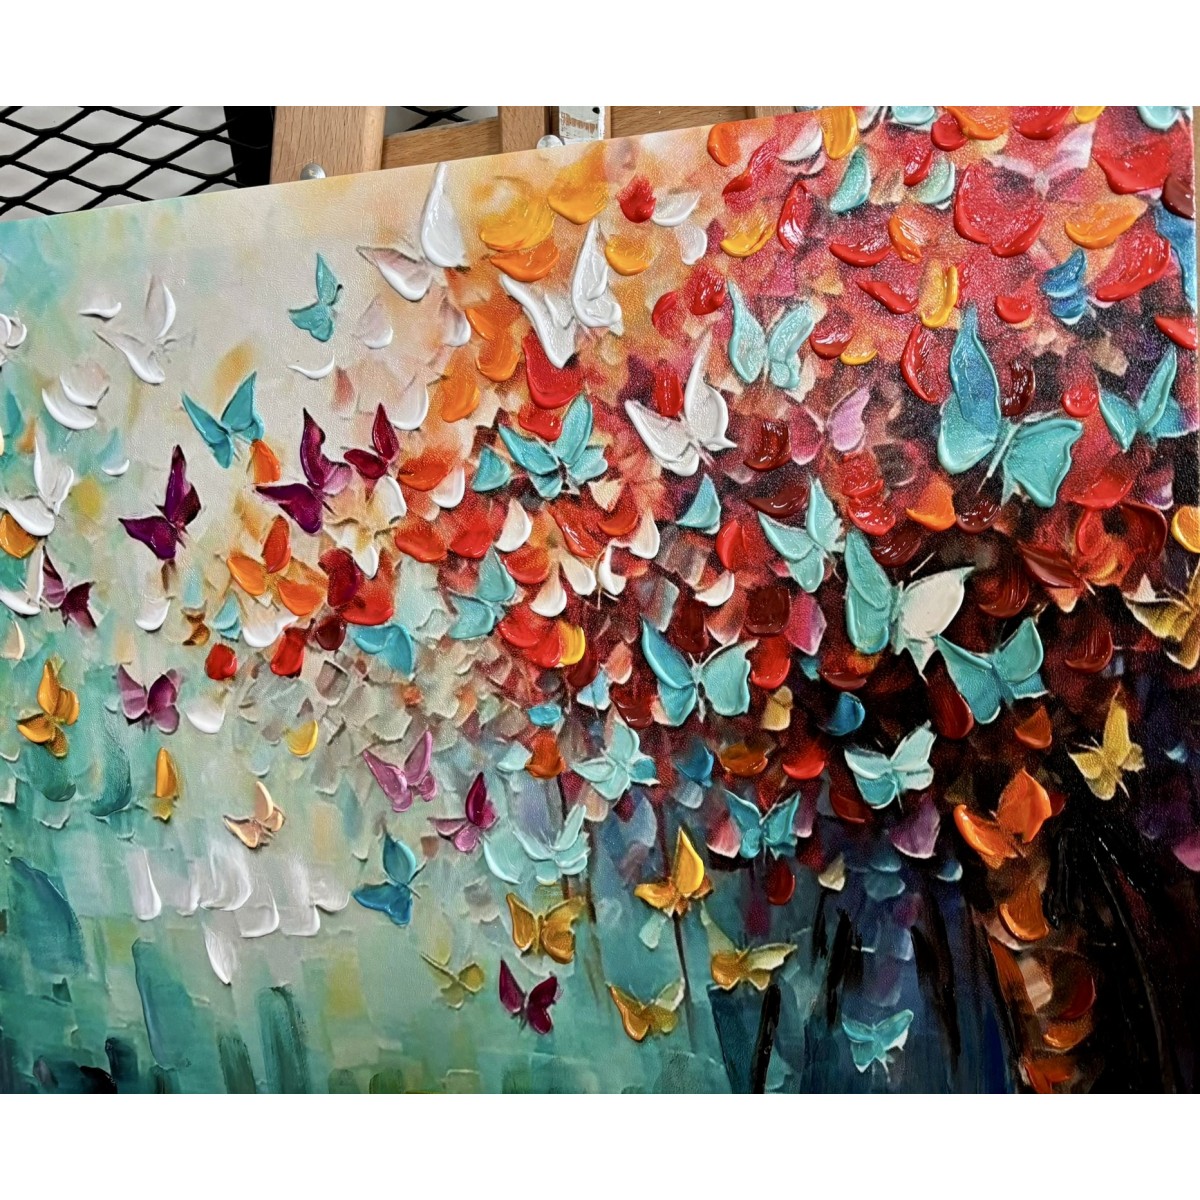 Colorful Butterflies 3D Heavy Textured Partial Oil Painting